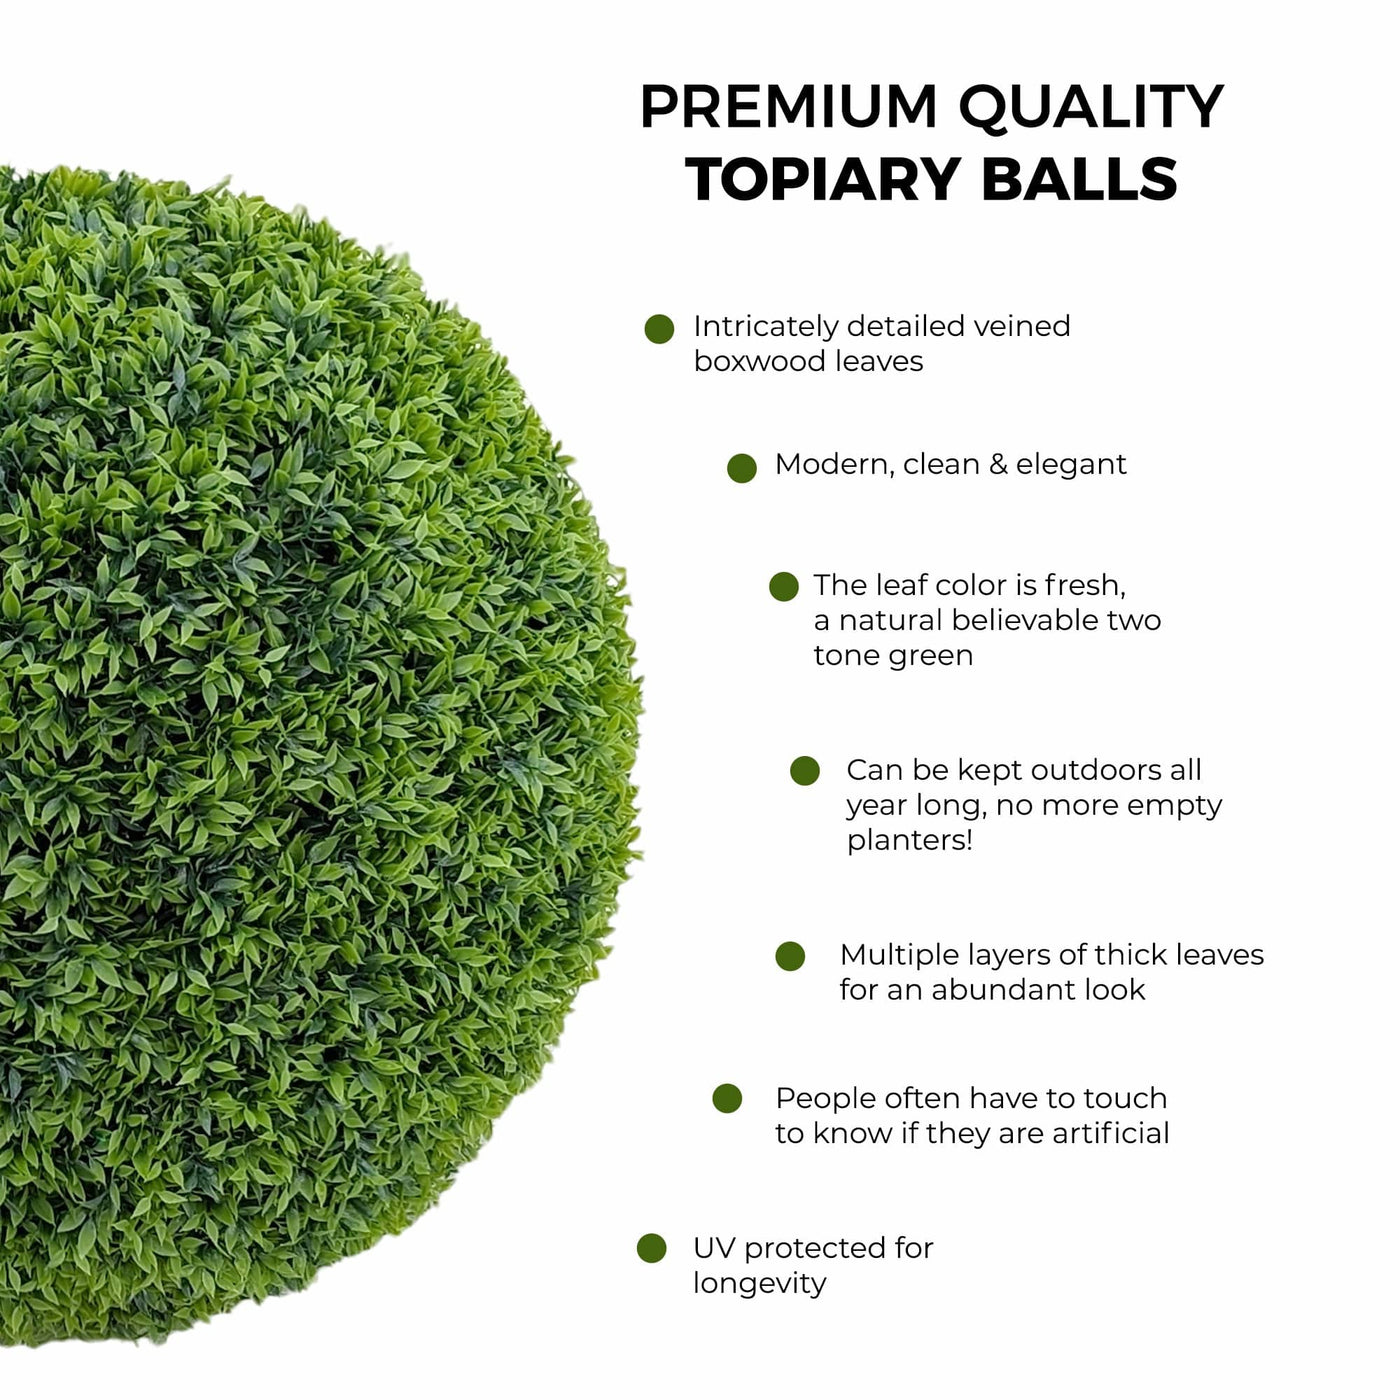 365 Curb Appeal Topiary ball 23" XL Better Than a Boxwood Topiary Ball